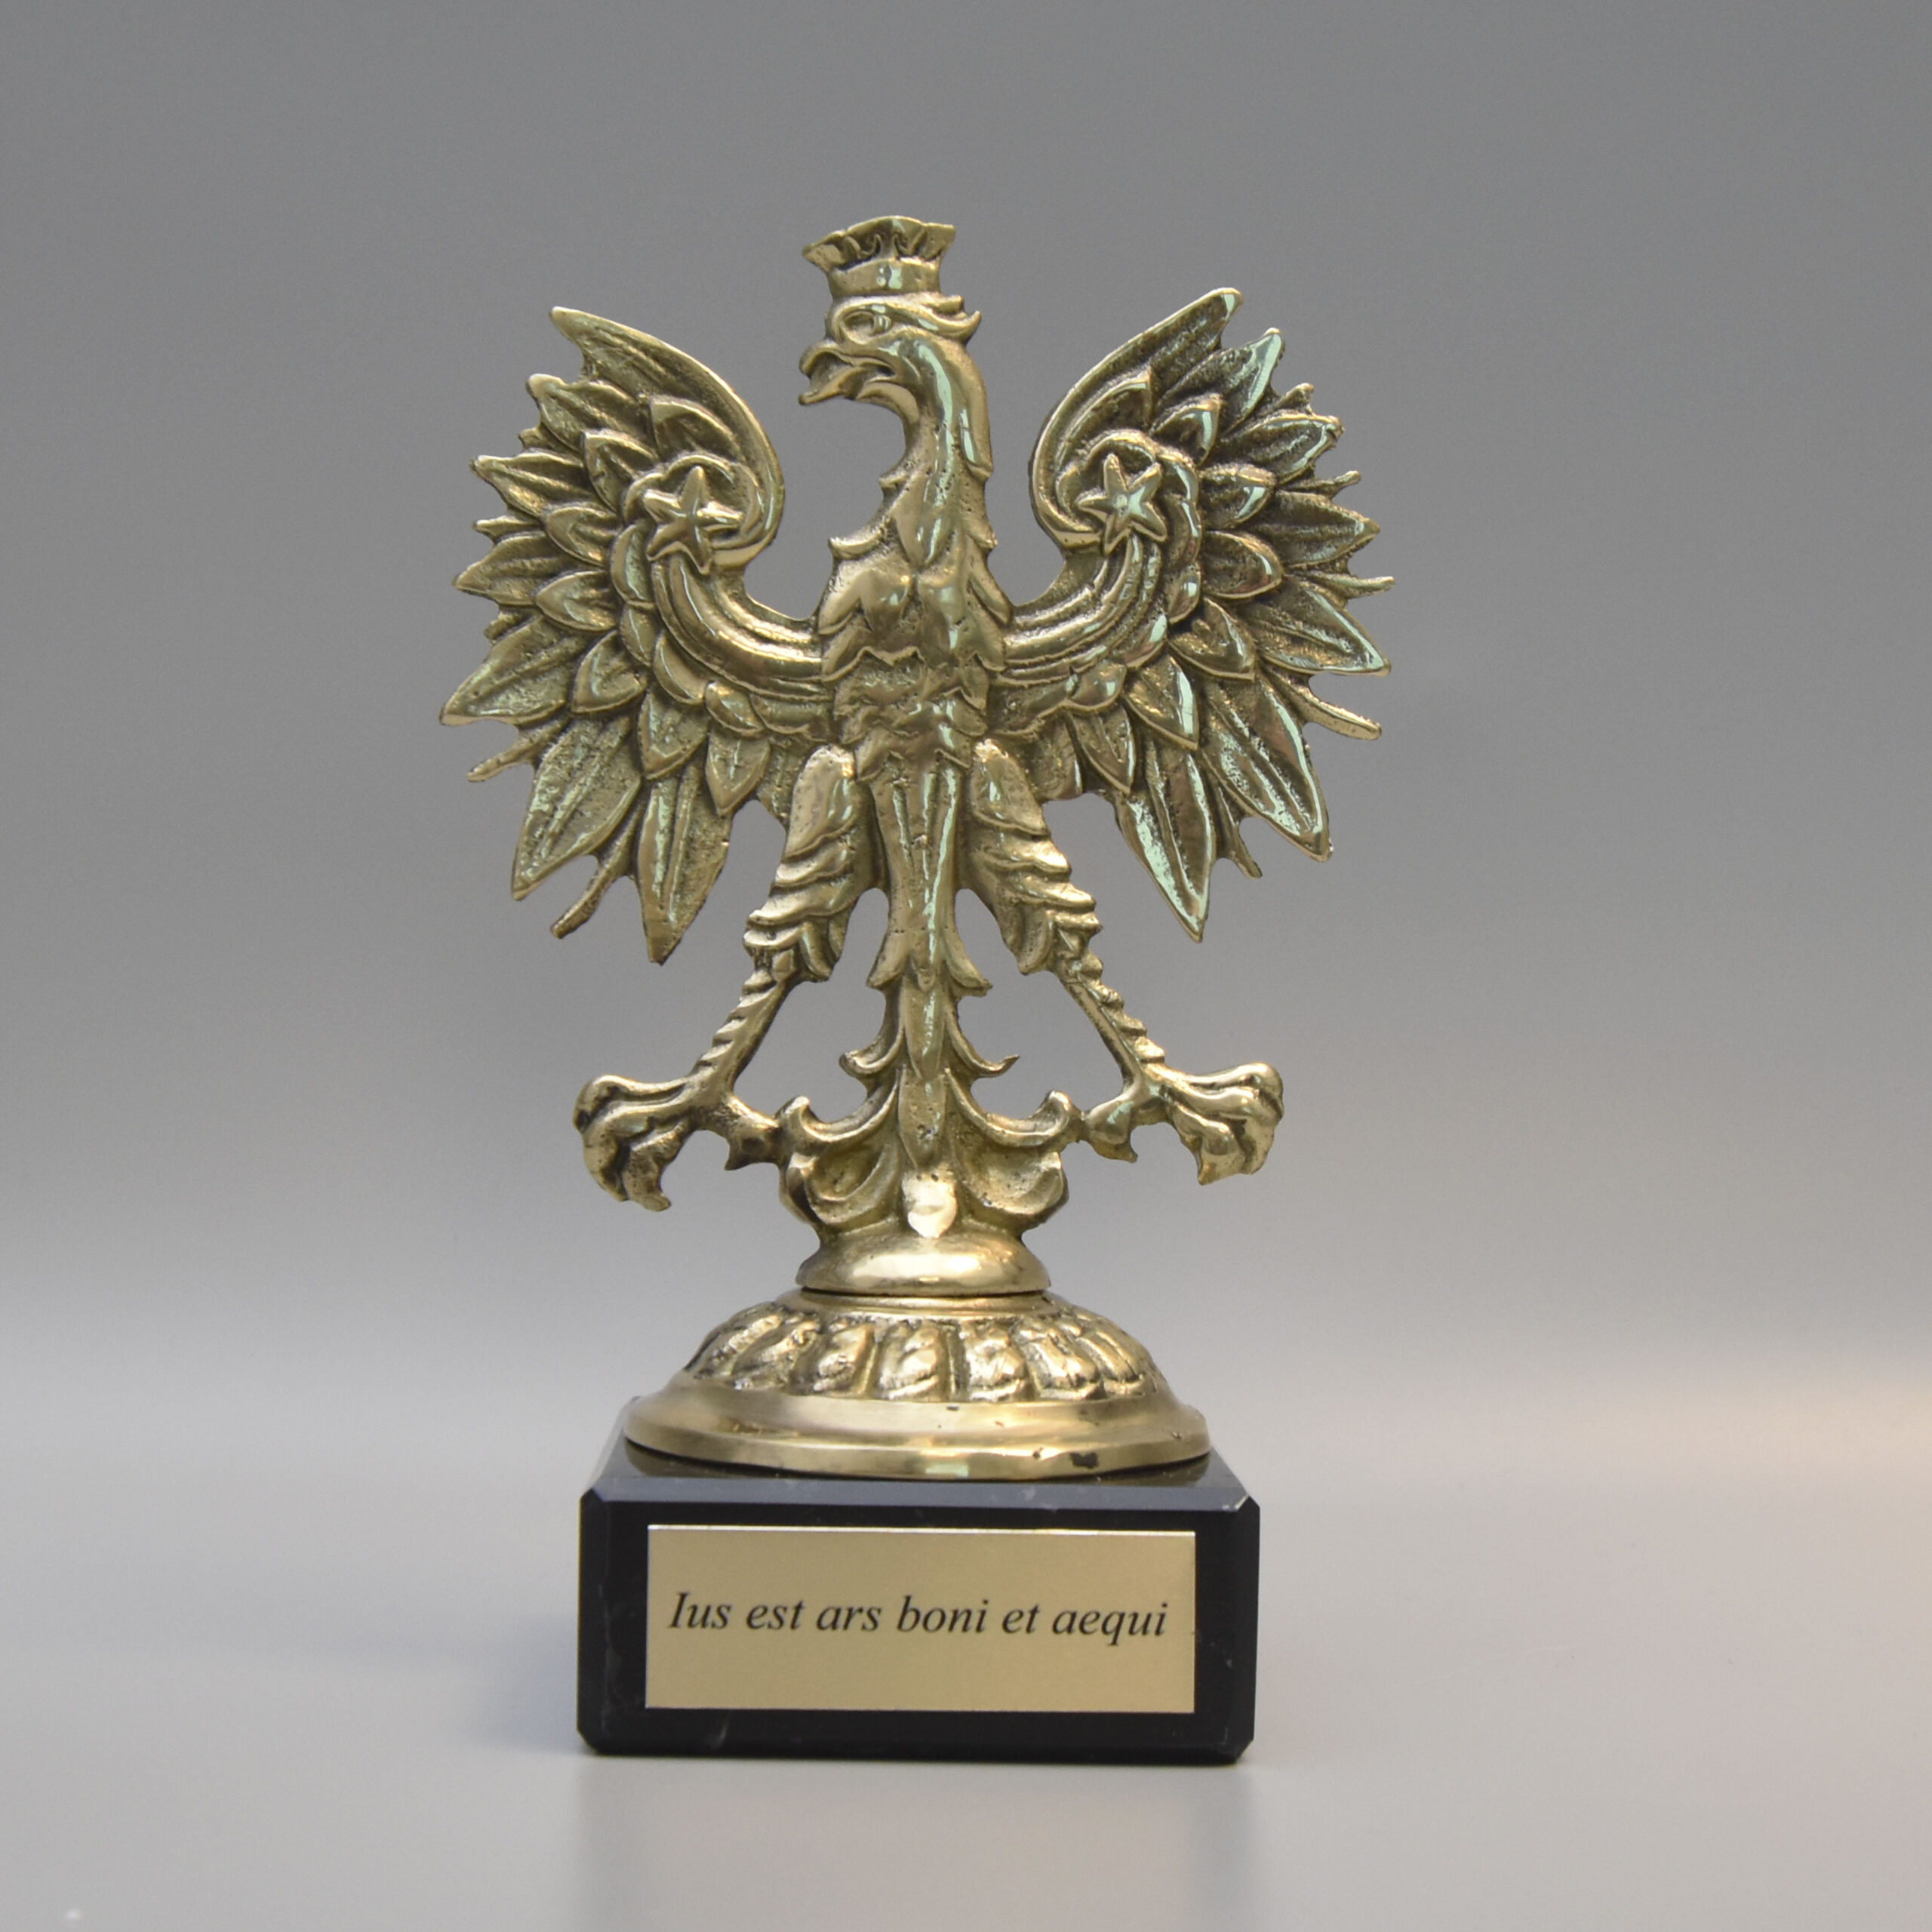 Crowned Eagle Brass Figurine on a Base with Engraving Coat of Arms of Poland Gift for Nomination for Bailiff